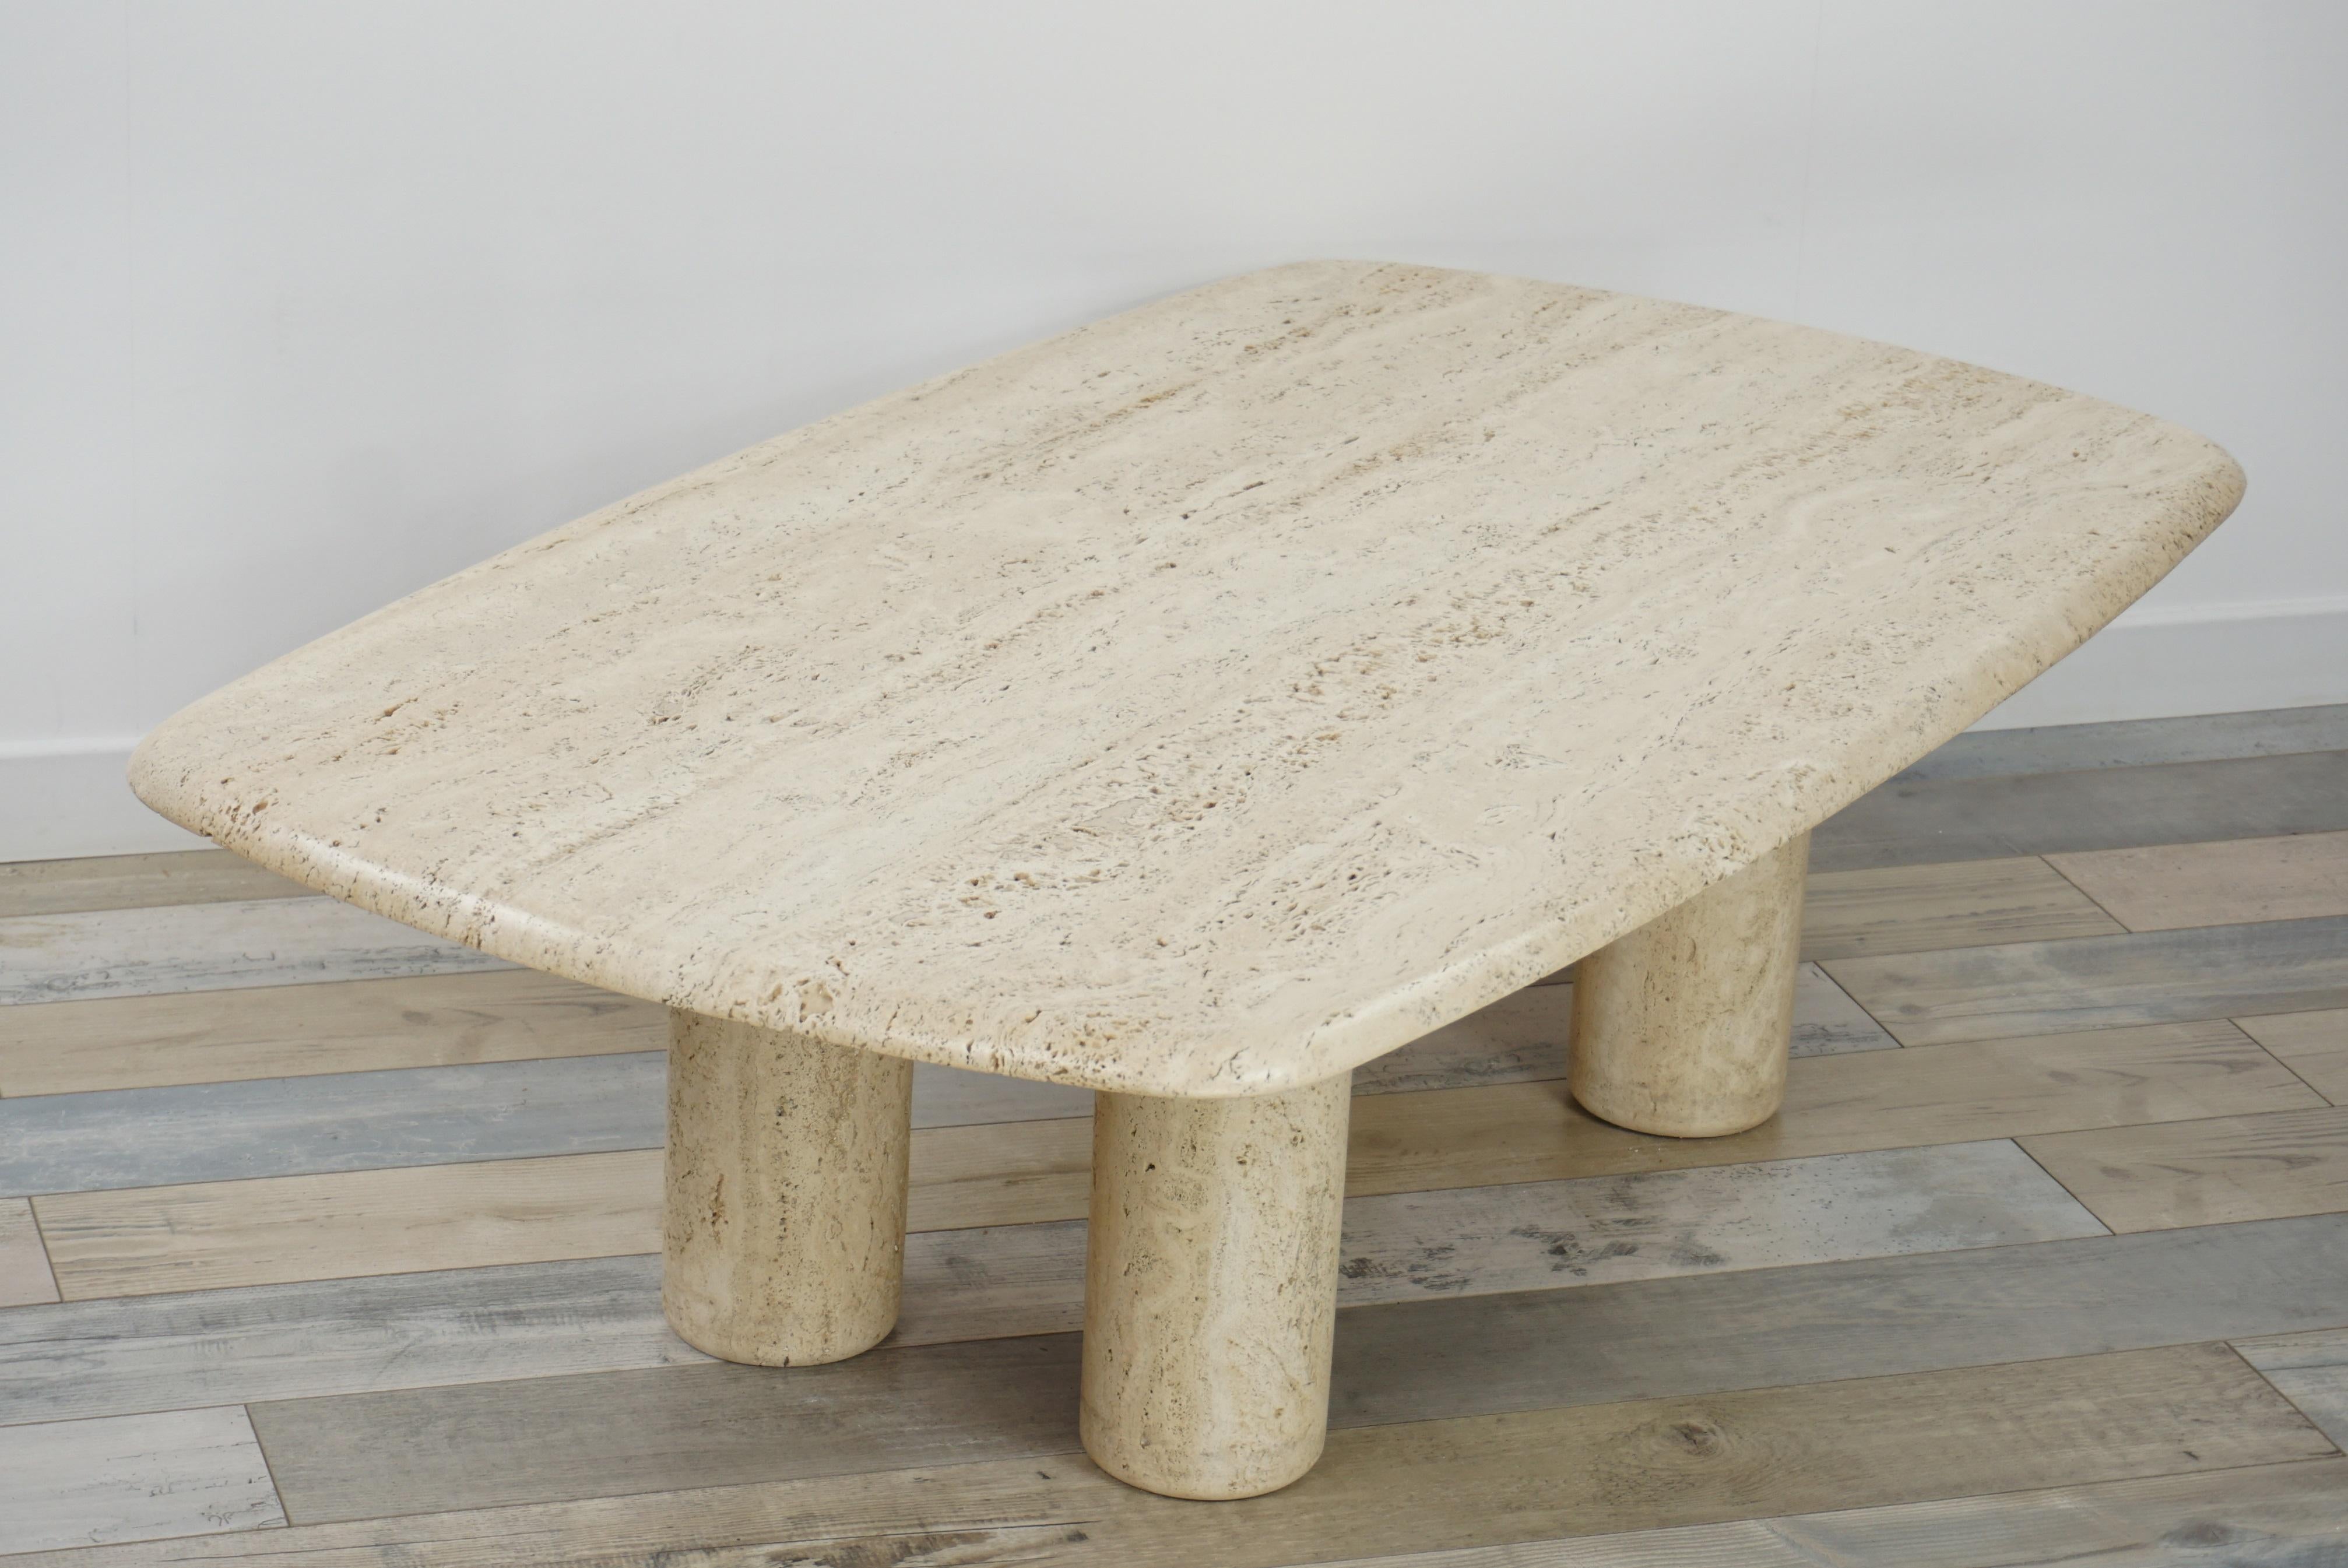 20th Century Travertine Coffee Table Italian Design from the 1970s